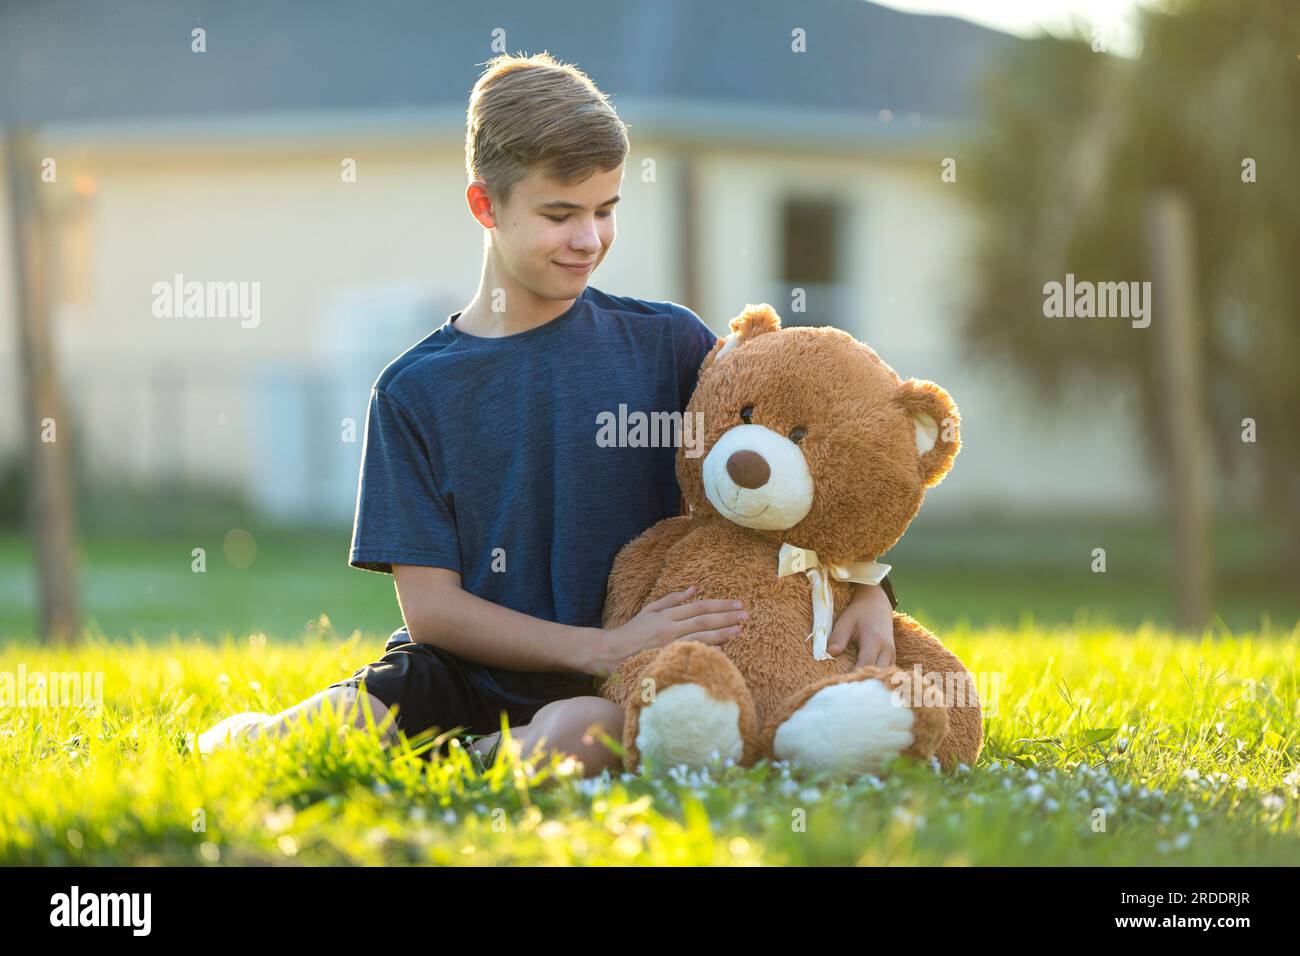 Happy teenager boy hugging his teddy bear friend outdoors on green grass lawn. Friendship concept. Stock Photo